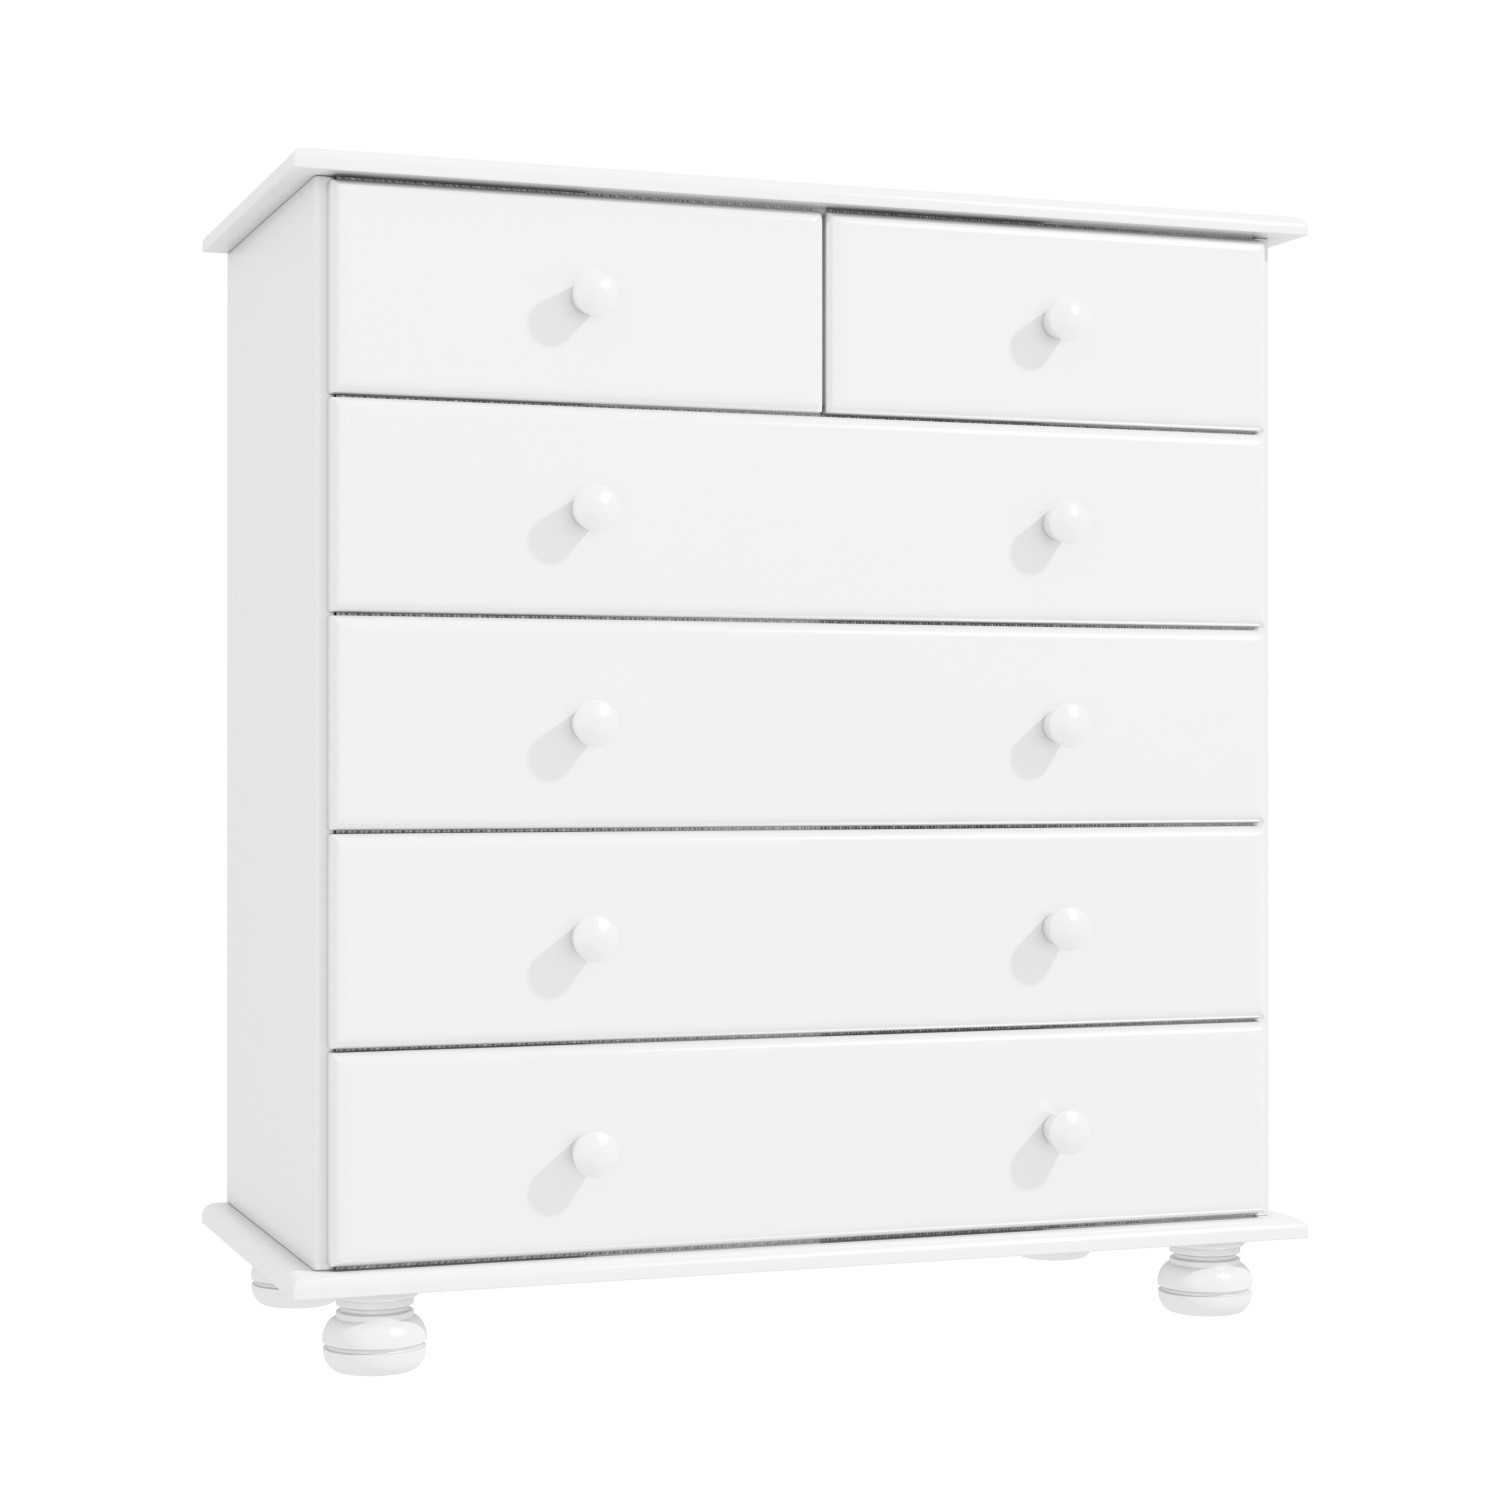 Read more about White painted chest of 6 drawers hamilton